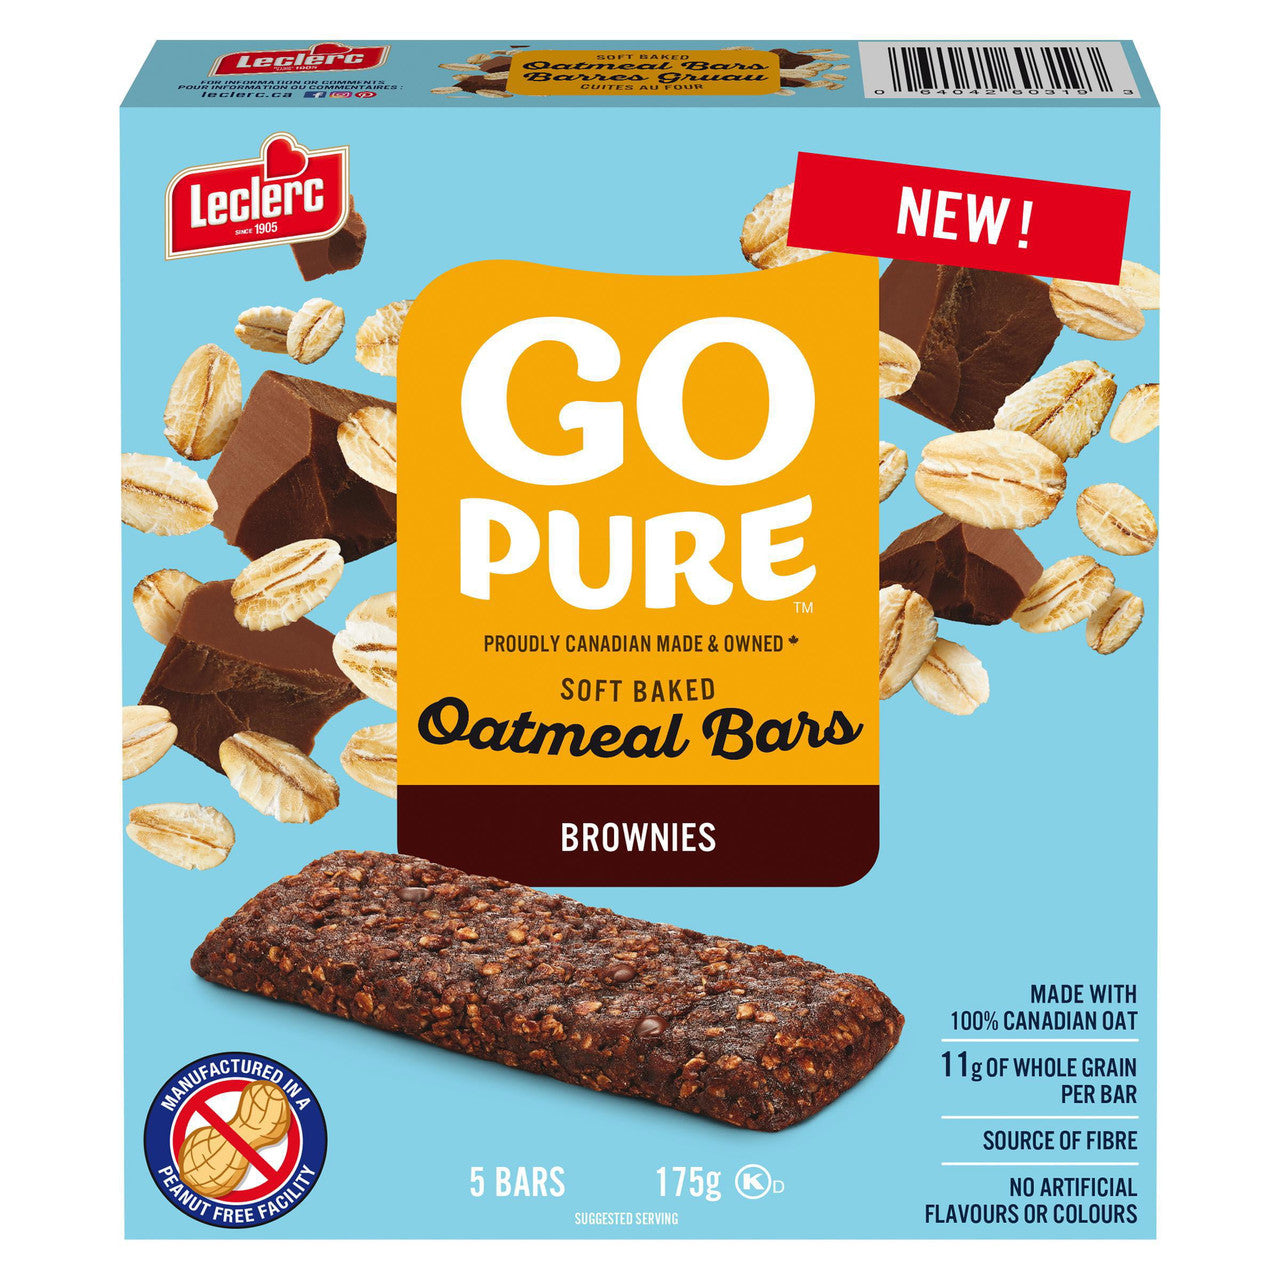 Leclerc Go Pure Brownies Soft Baked Oatmeal Bars, 175g/6 oz. Box {Imported from Canada}